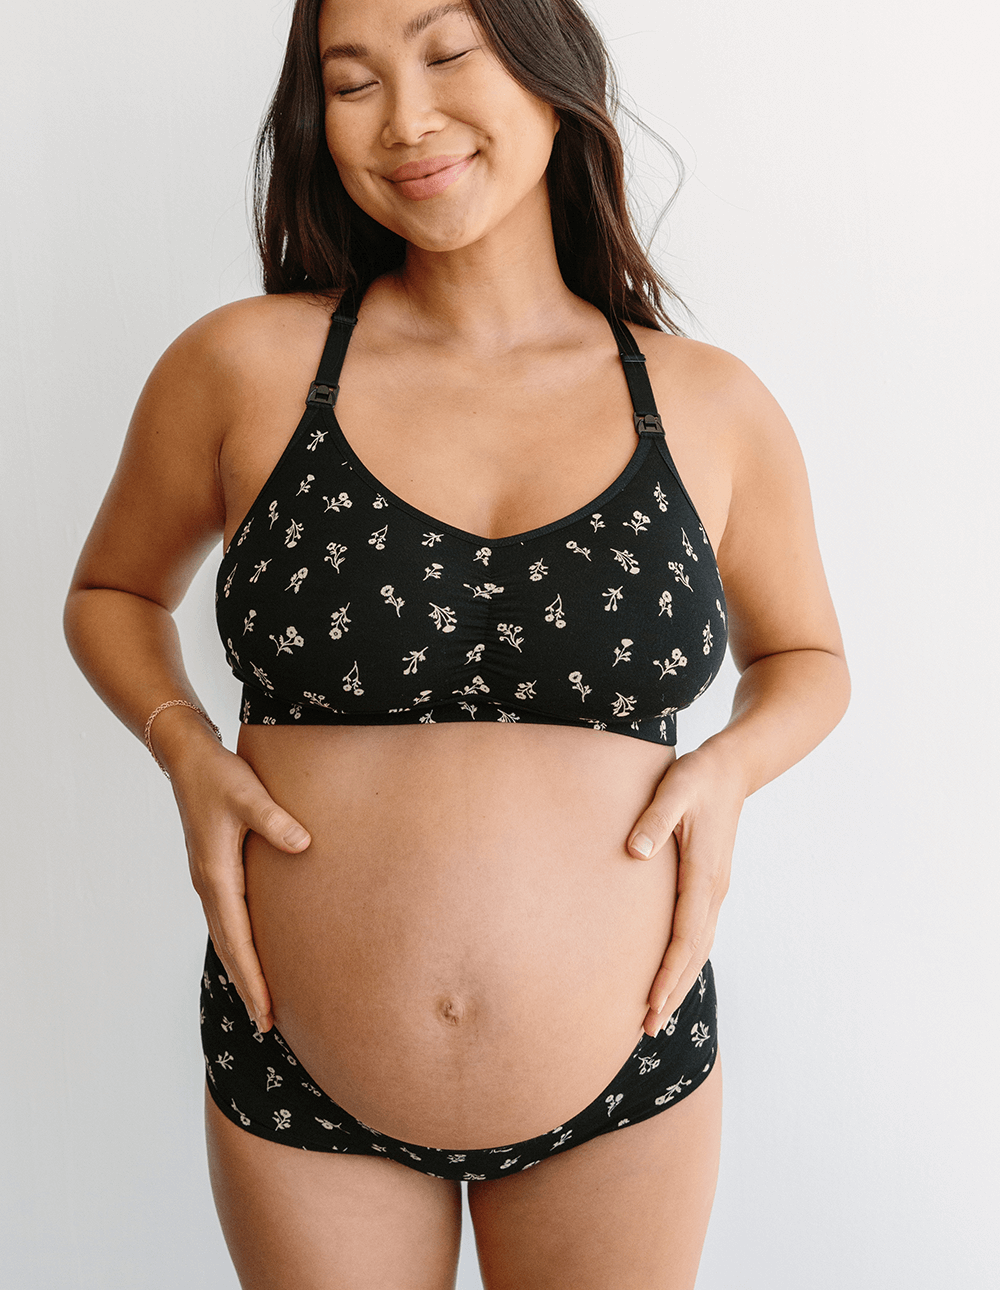 The JENNA, Structure, stretch & support Nursing bra & maternity under  belly panty set. - Look & feel good with this stylish set - Availa